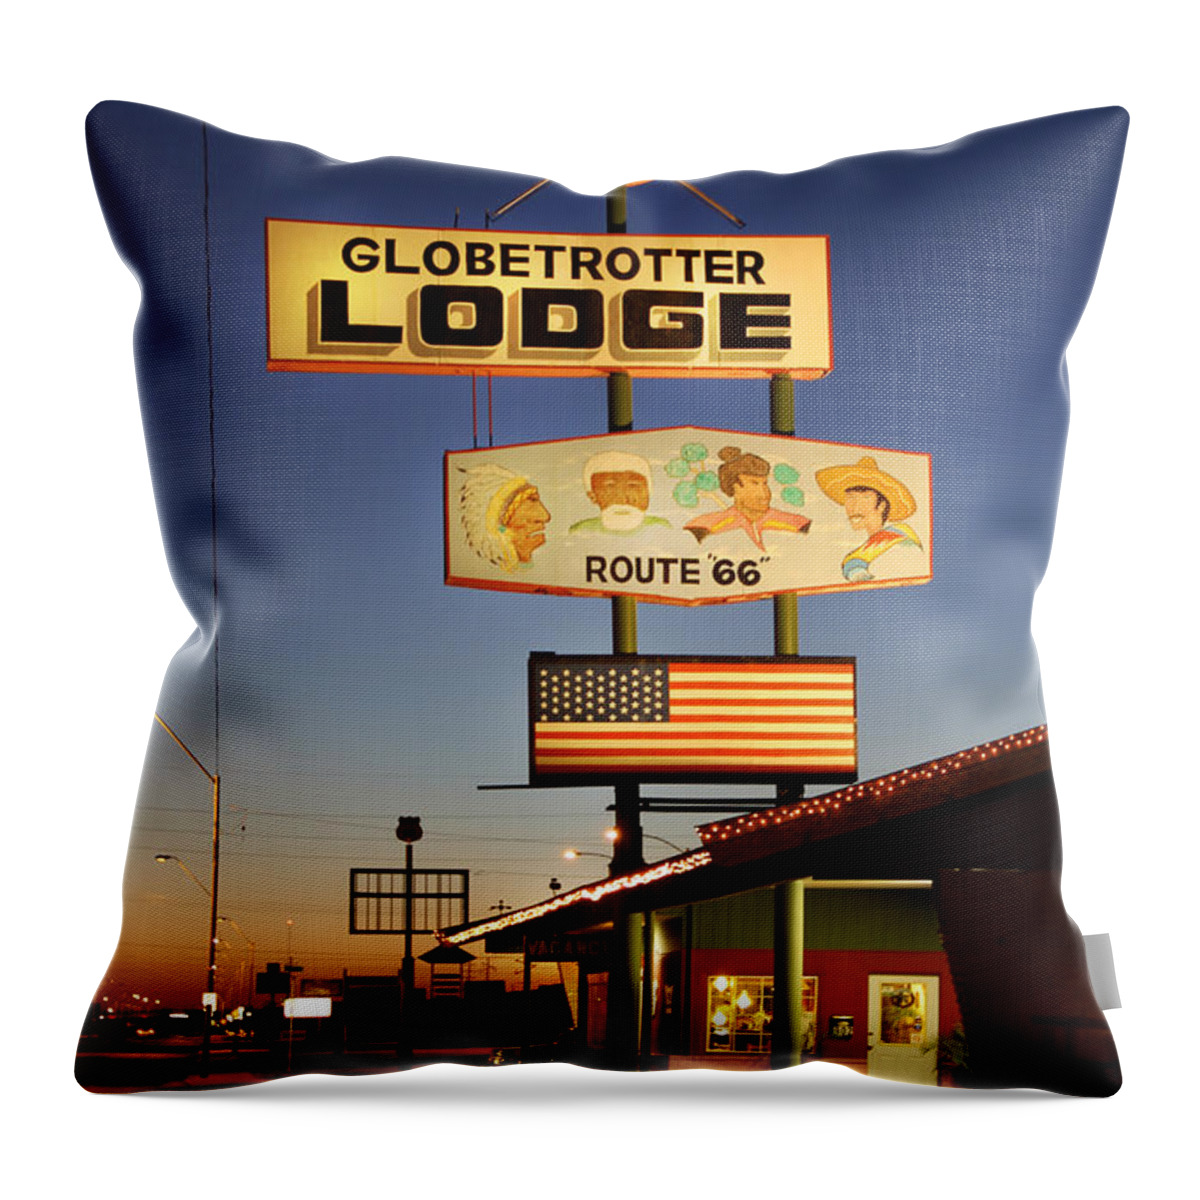 Globetrotter Lodge Throw Pillow featuring the photograph Globetrotter Lodge - Holbrook by Mike McGlothlen